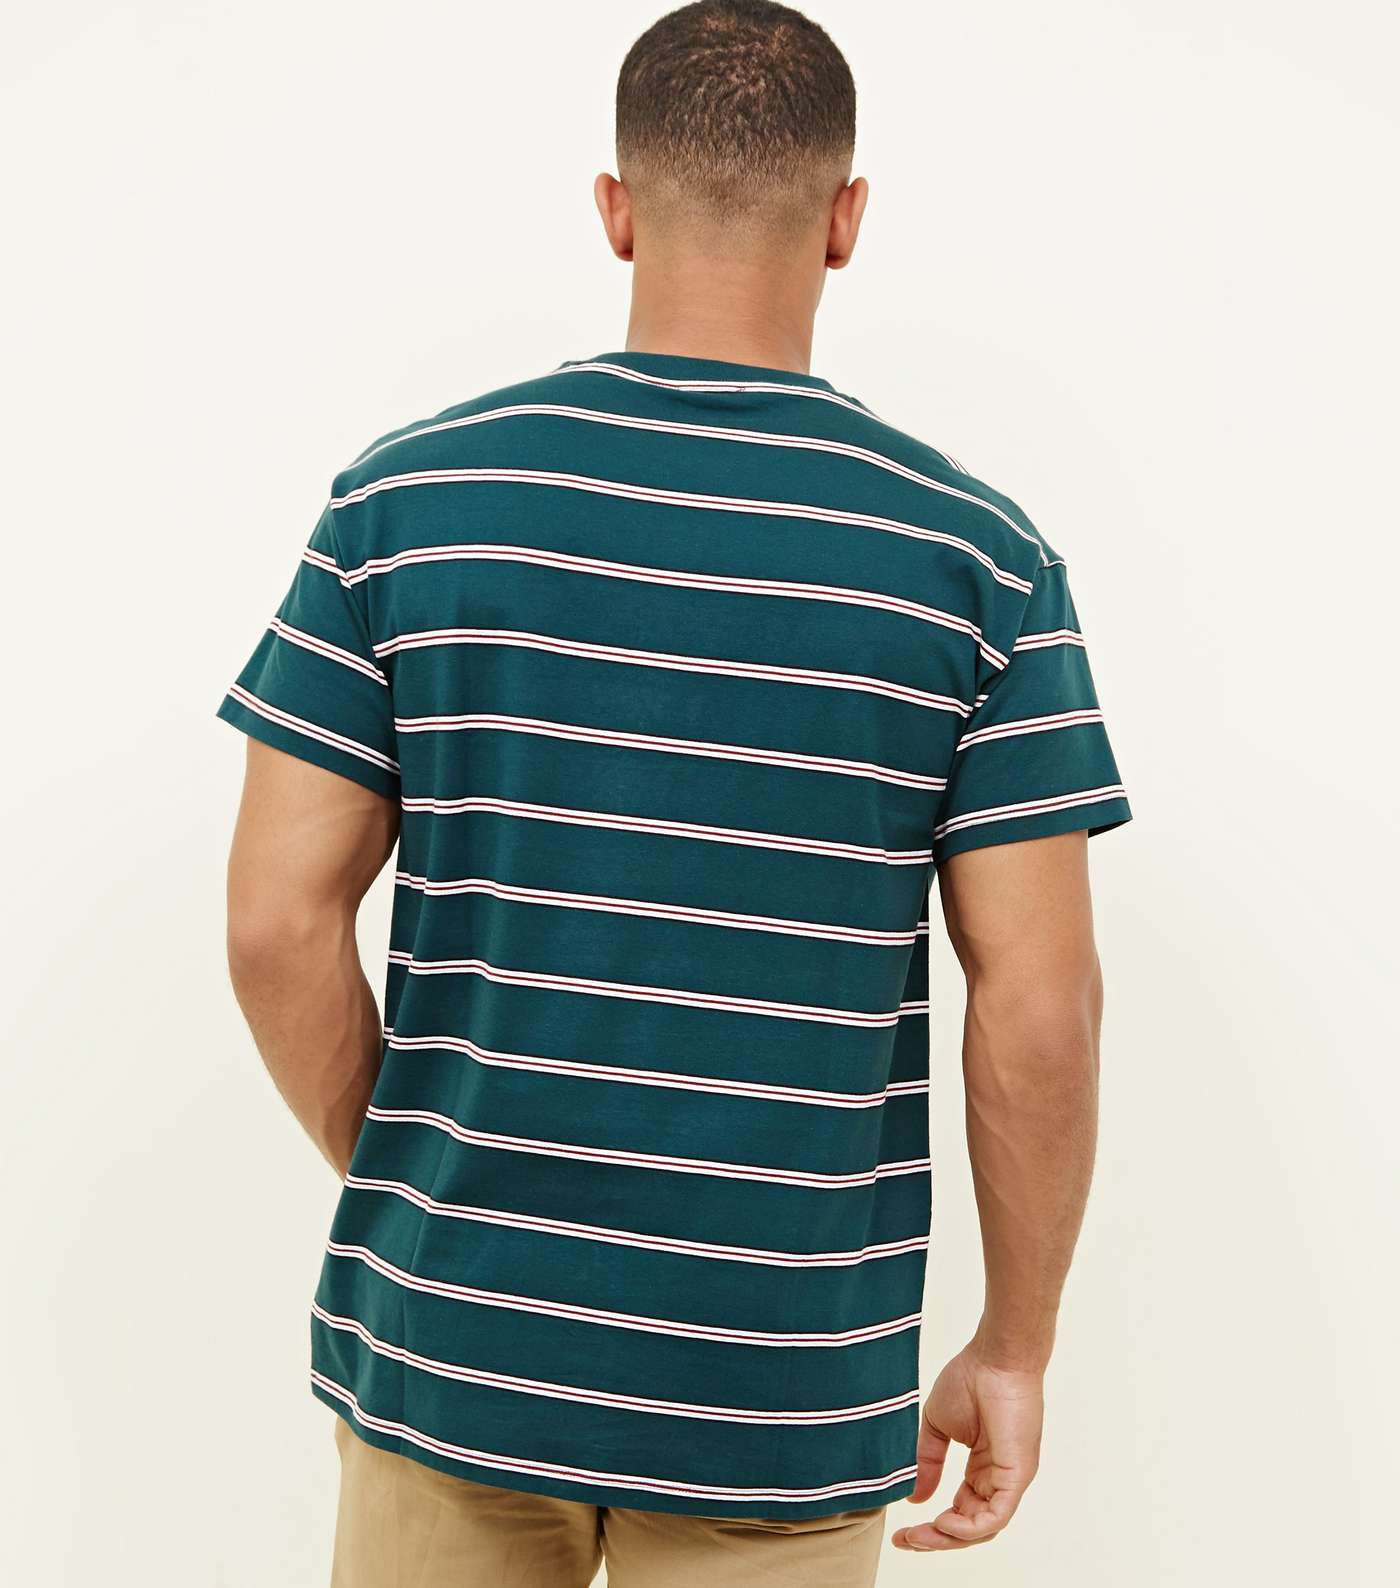 Teal Double Stripe T-Shirt Image 3